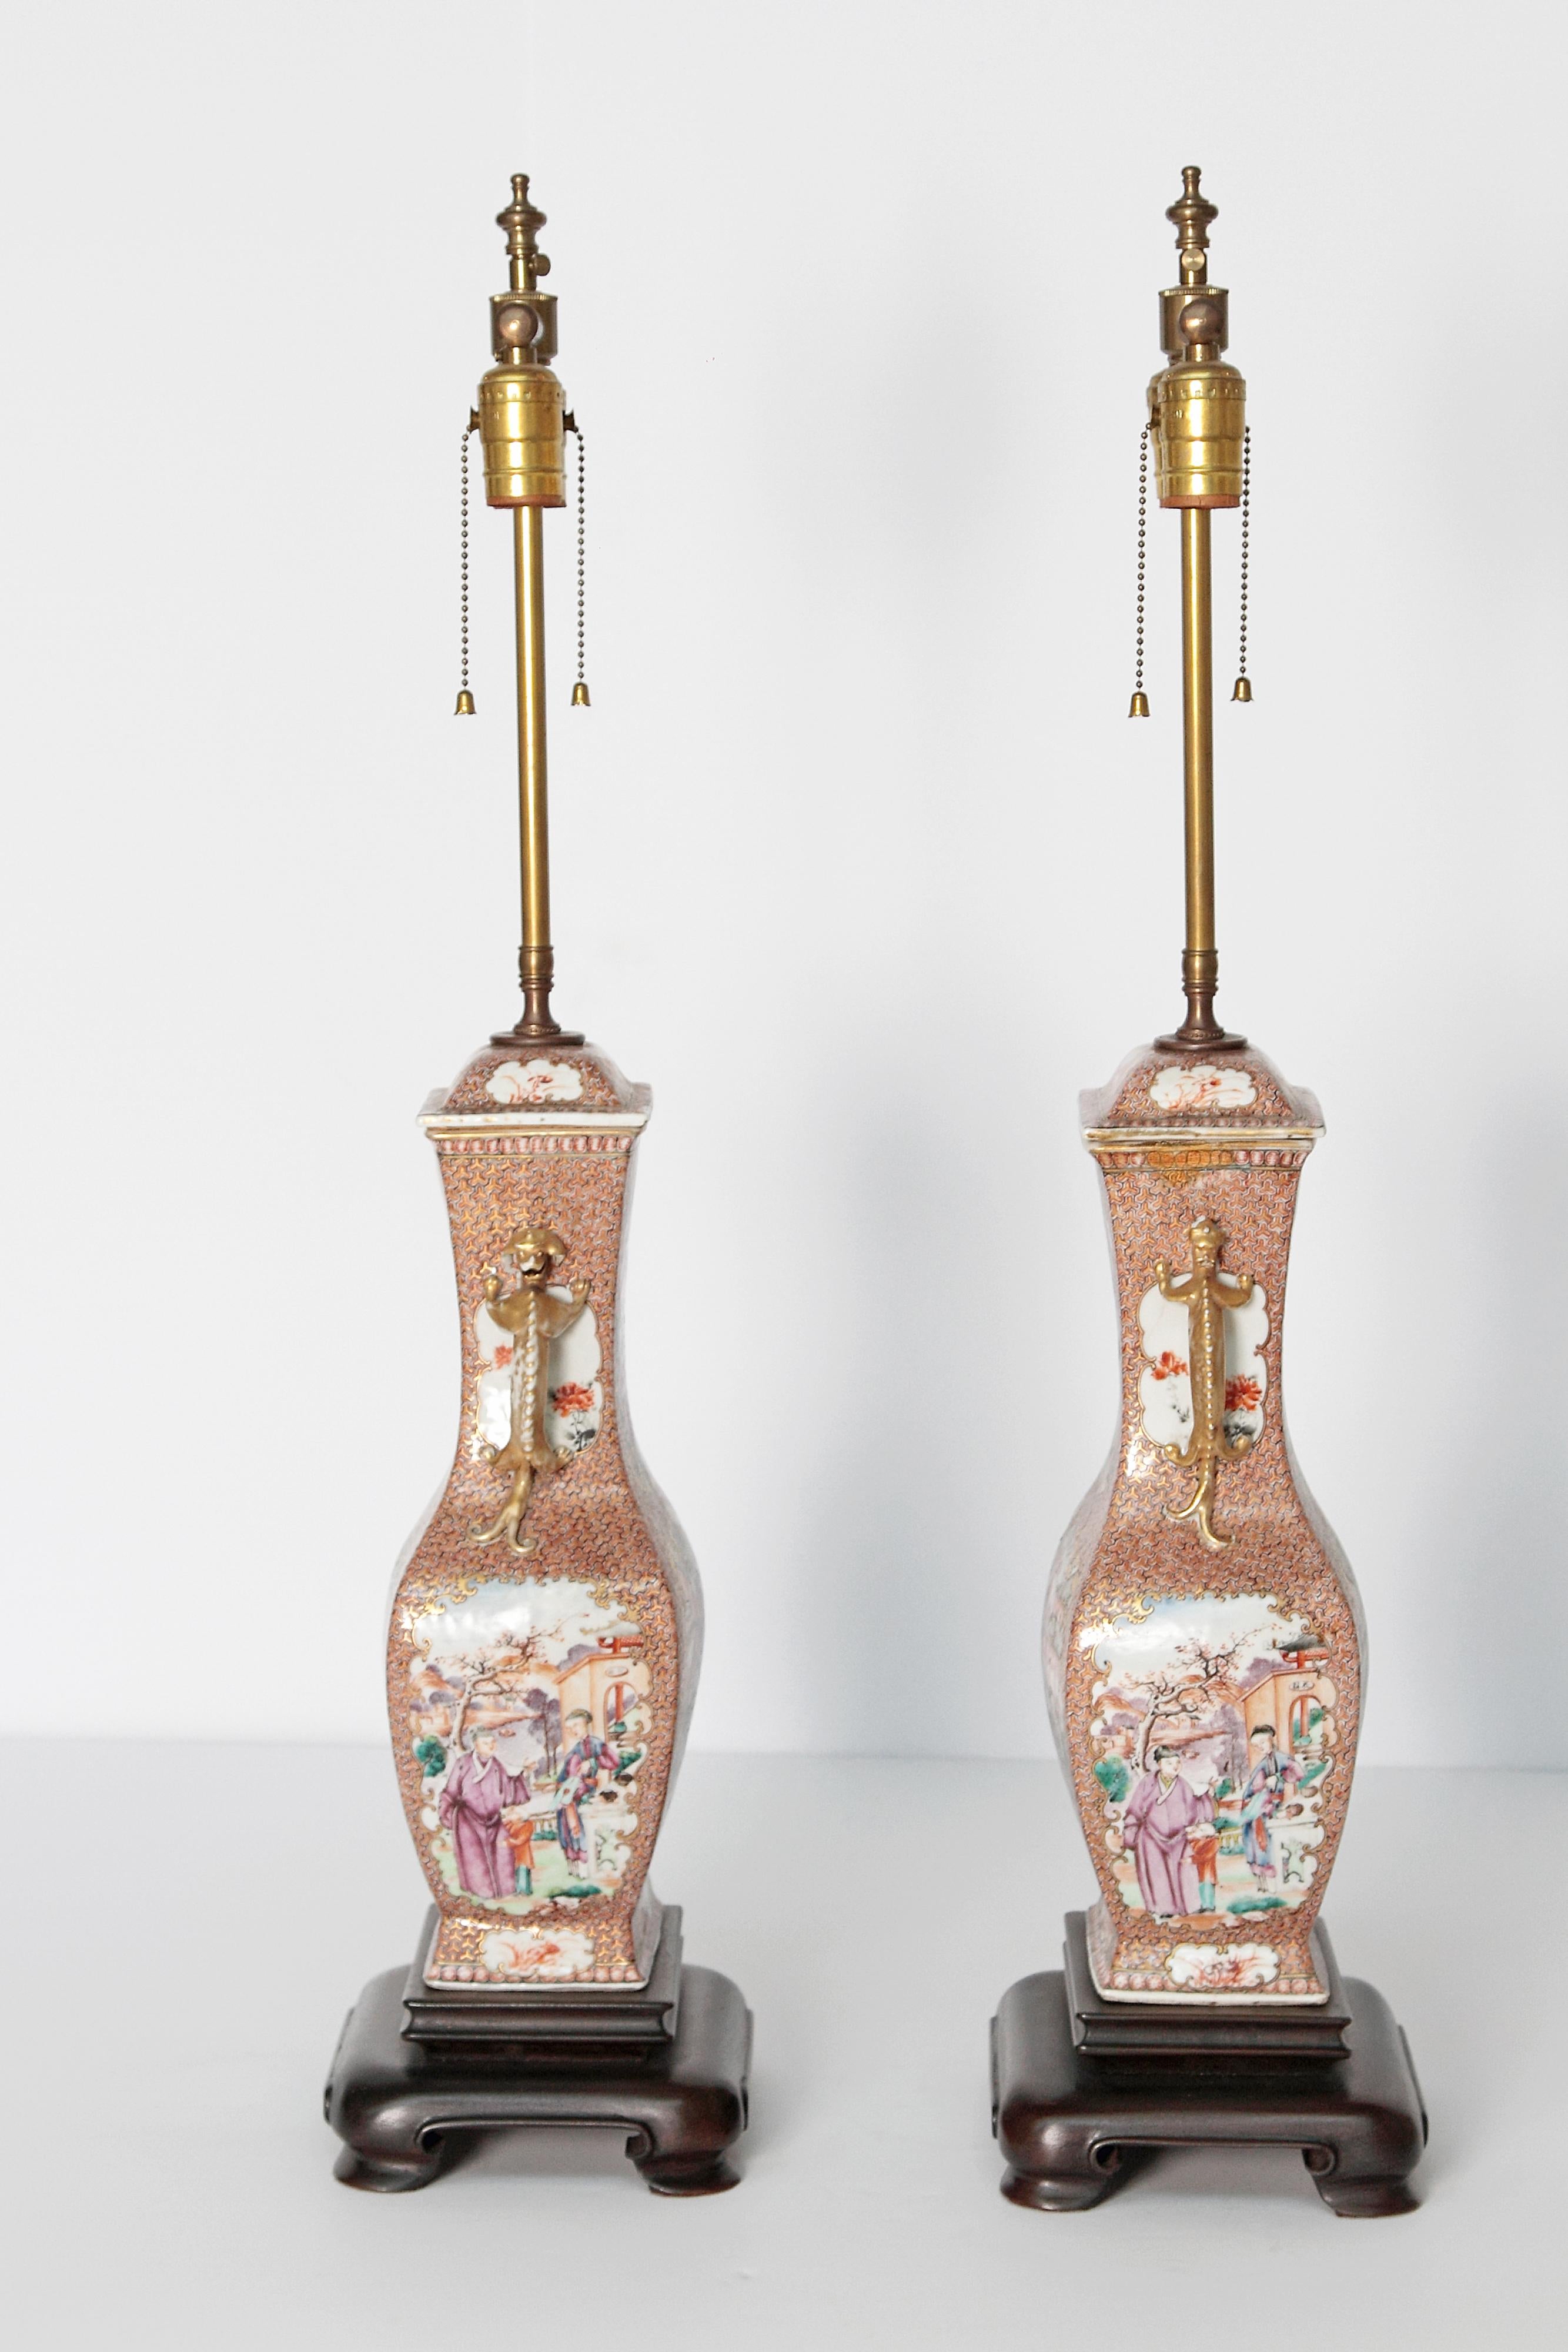 Pair of Early 19th Century Chinese Export Rose Mandarin Porcelain Jars as Lamps For Sale 5